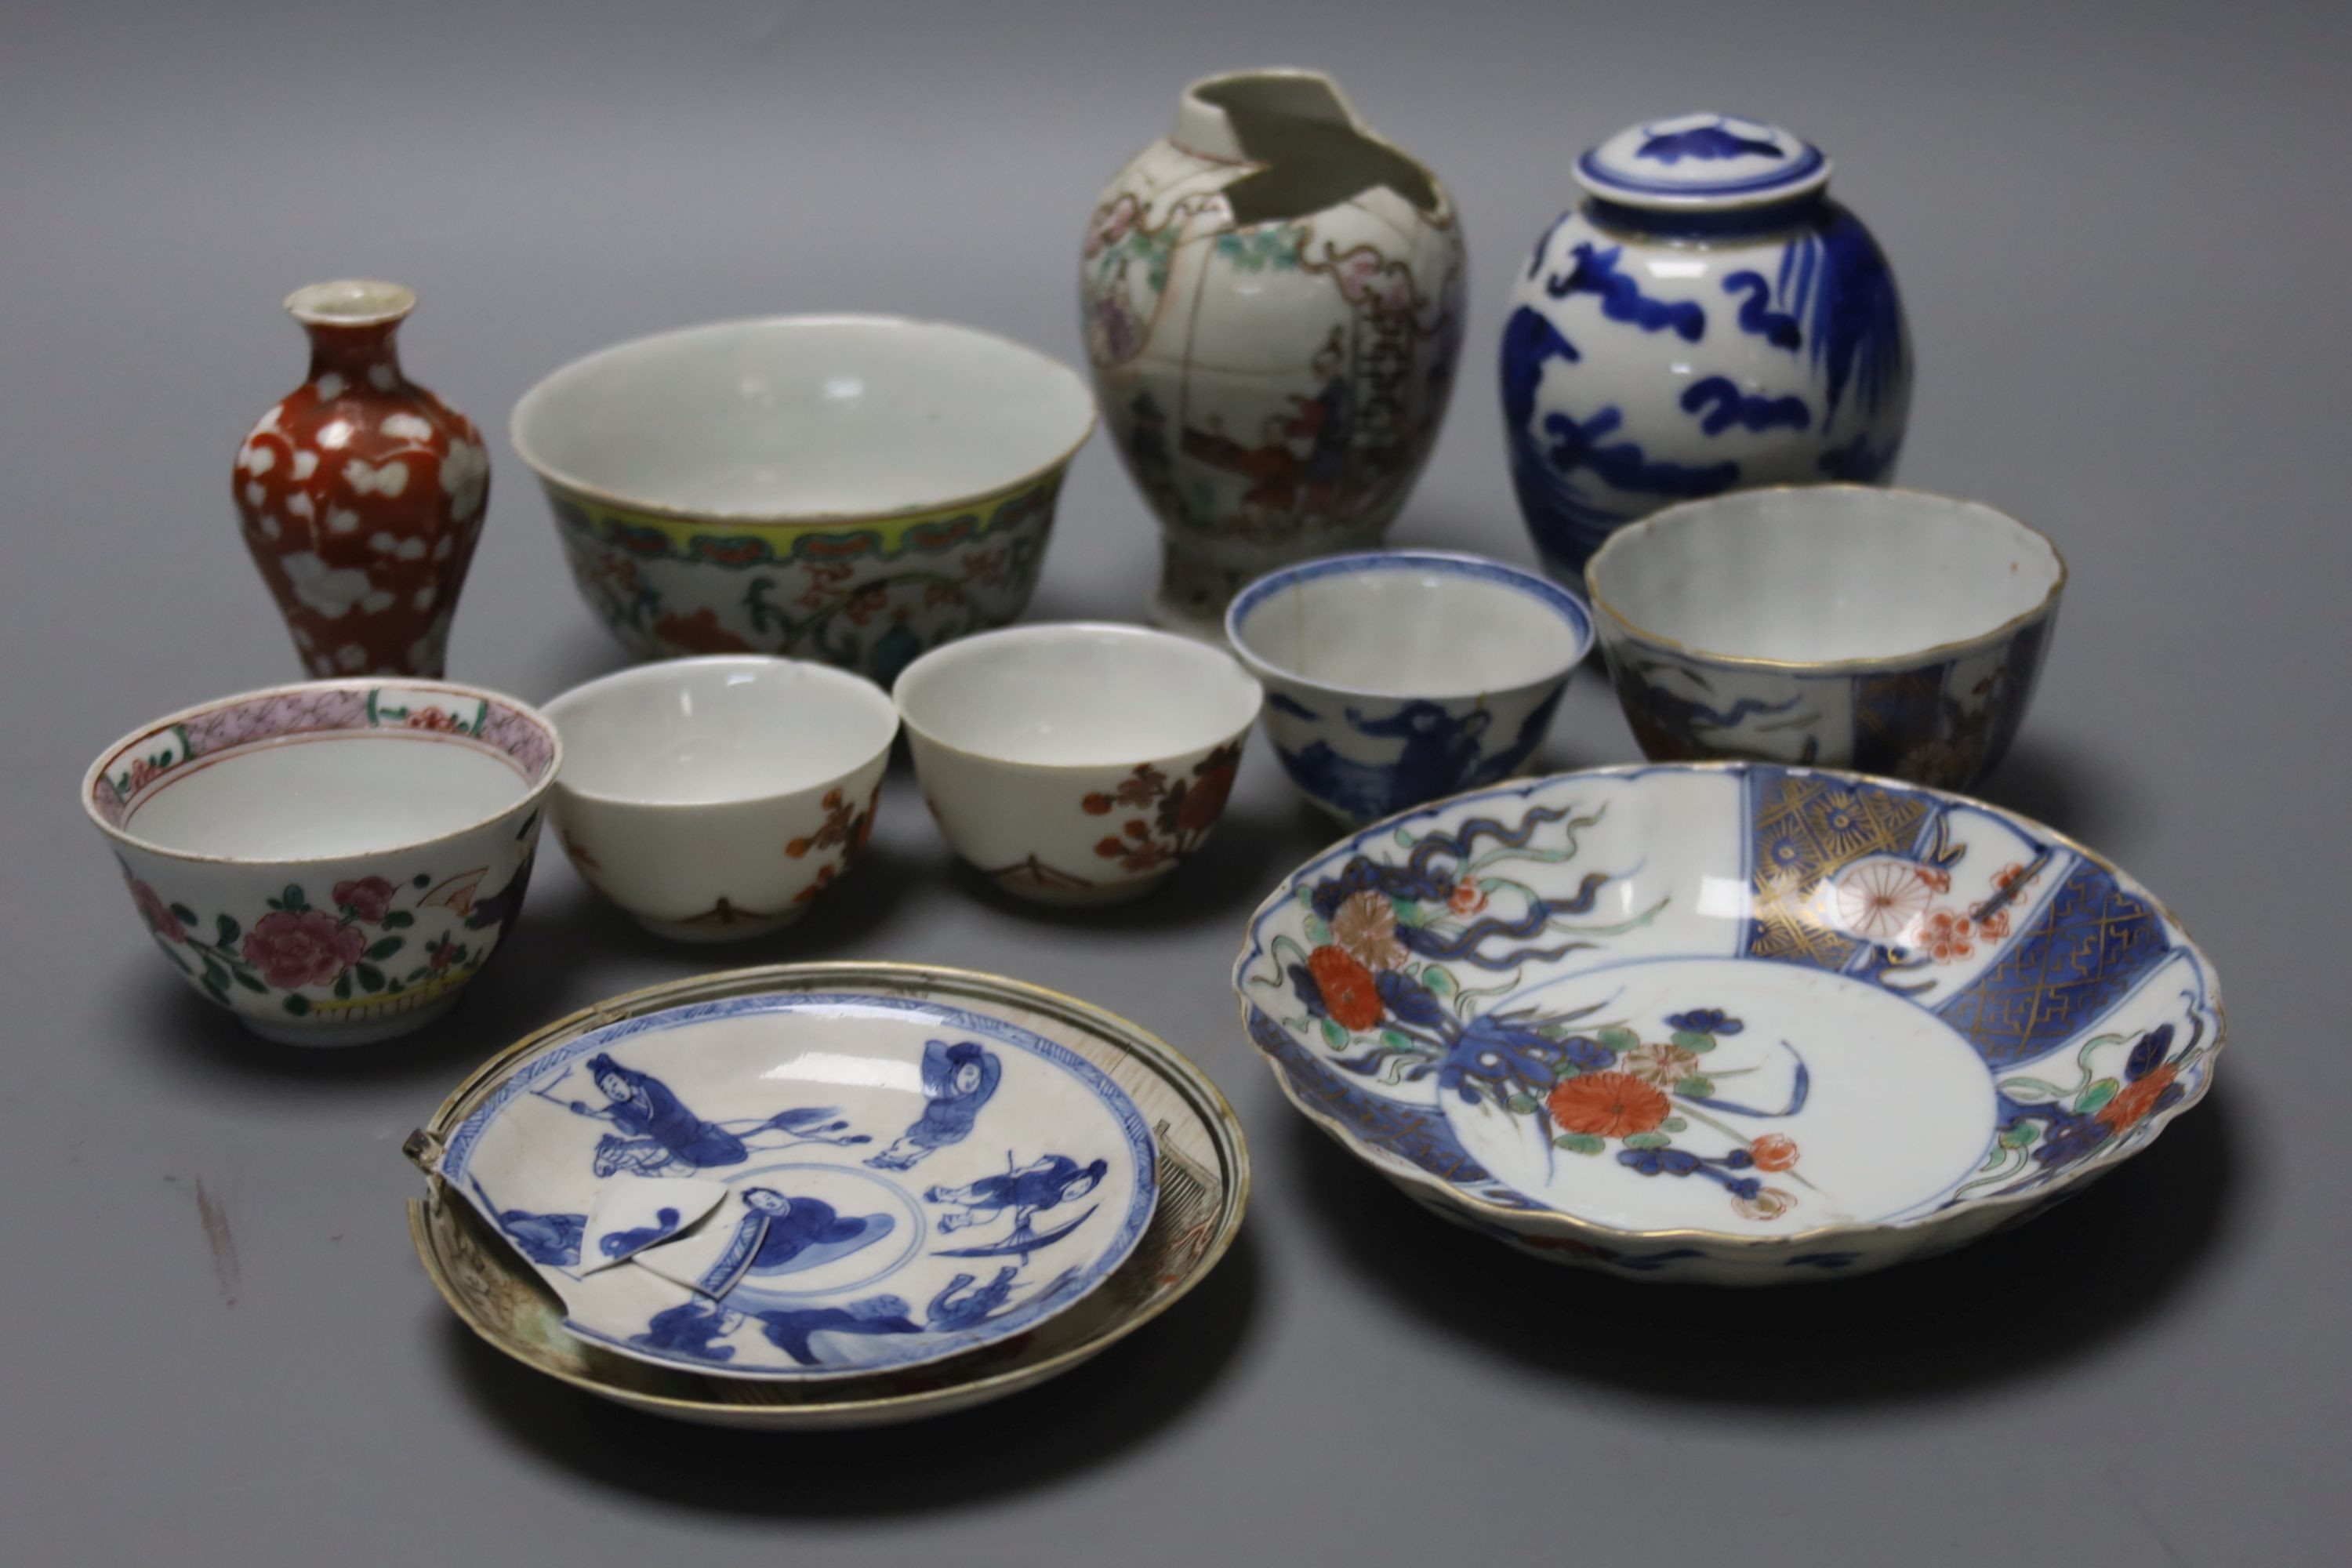 A group of Chinese enamelled porcelain vases and bowls, a similar blue-and-white jar and cover, 18th century and later